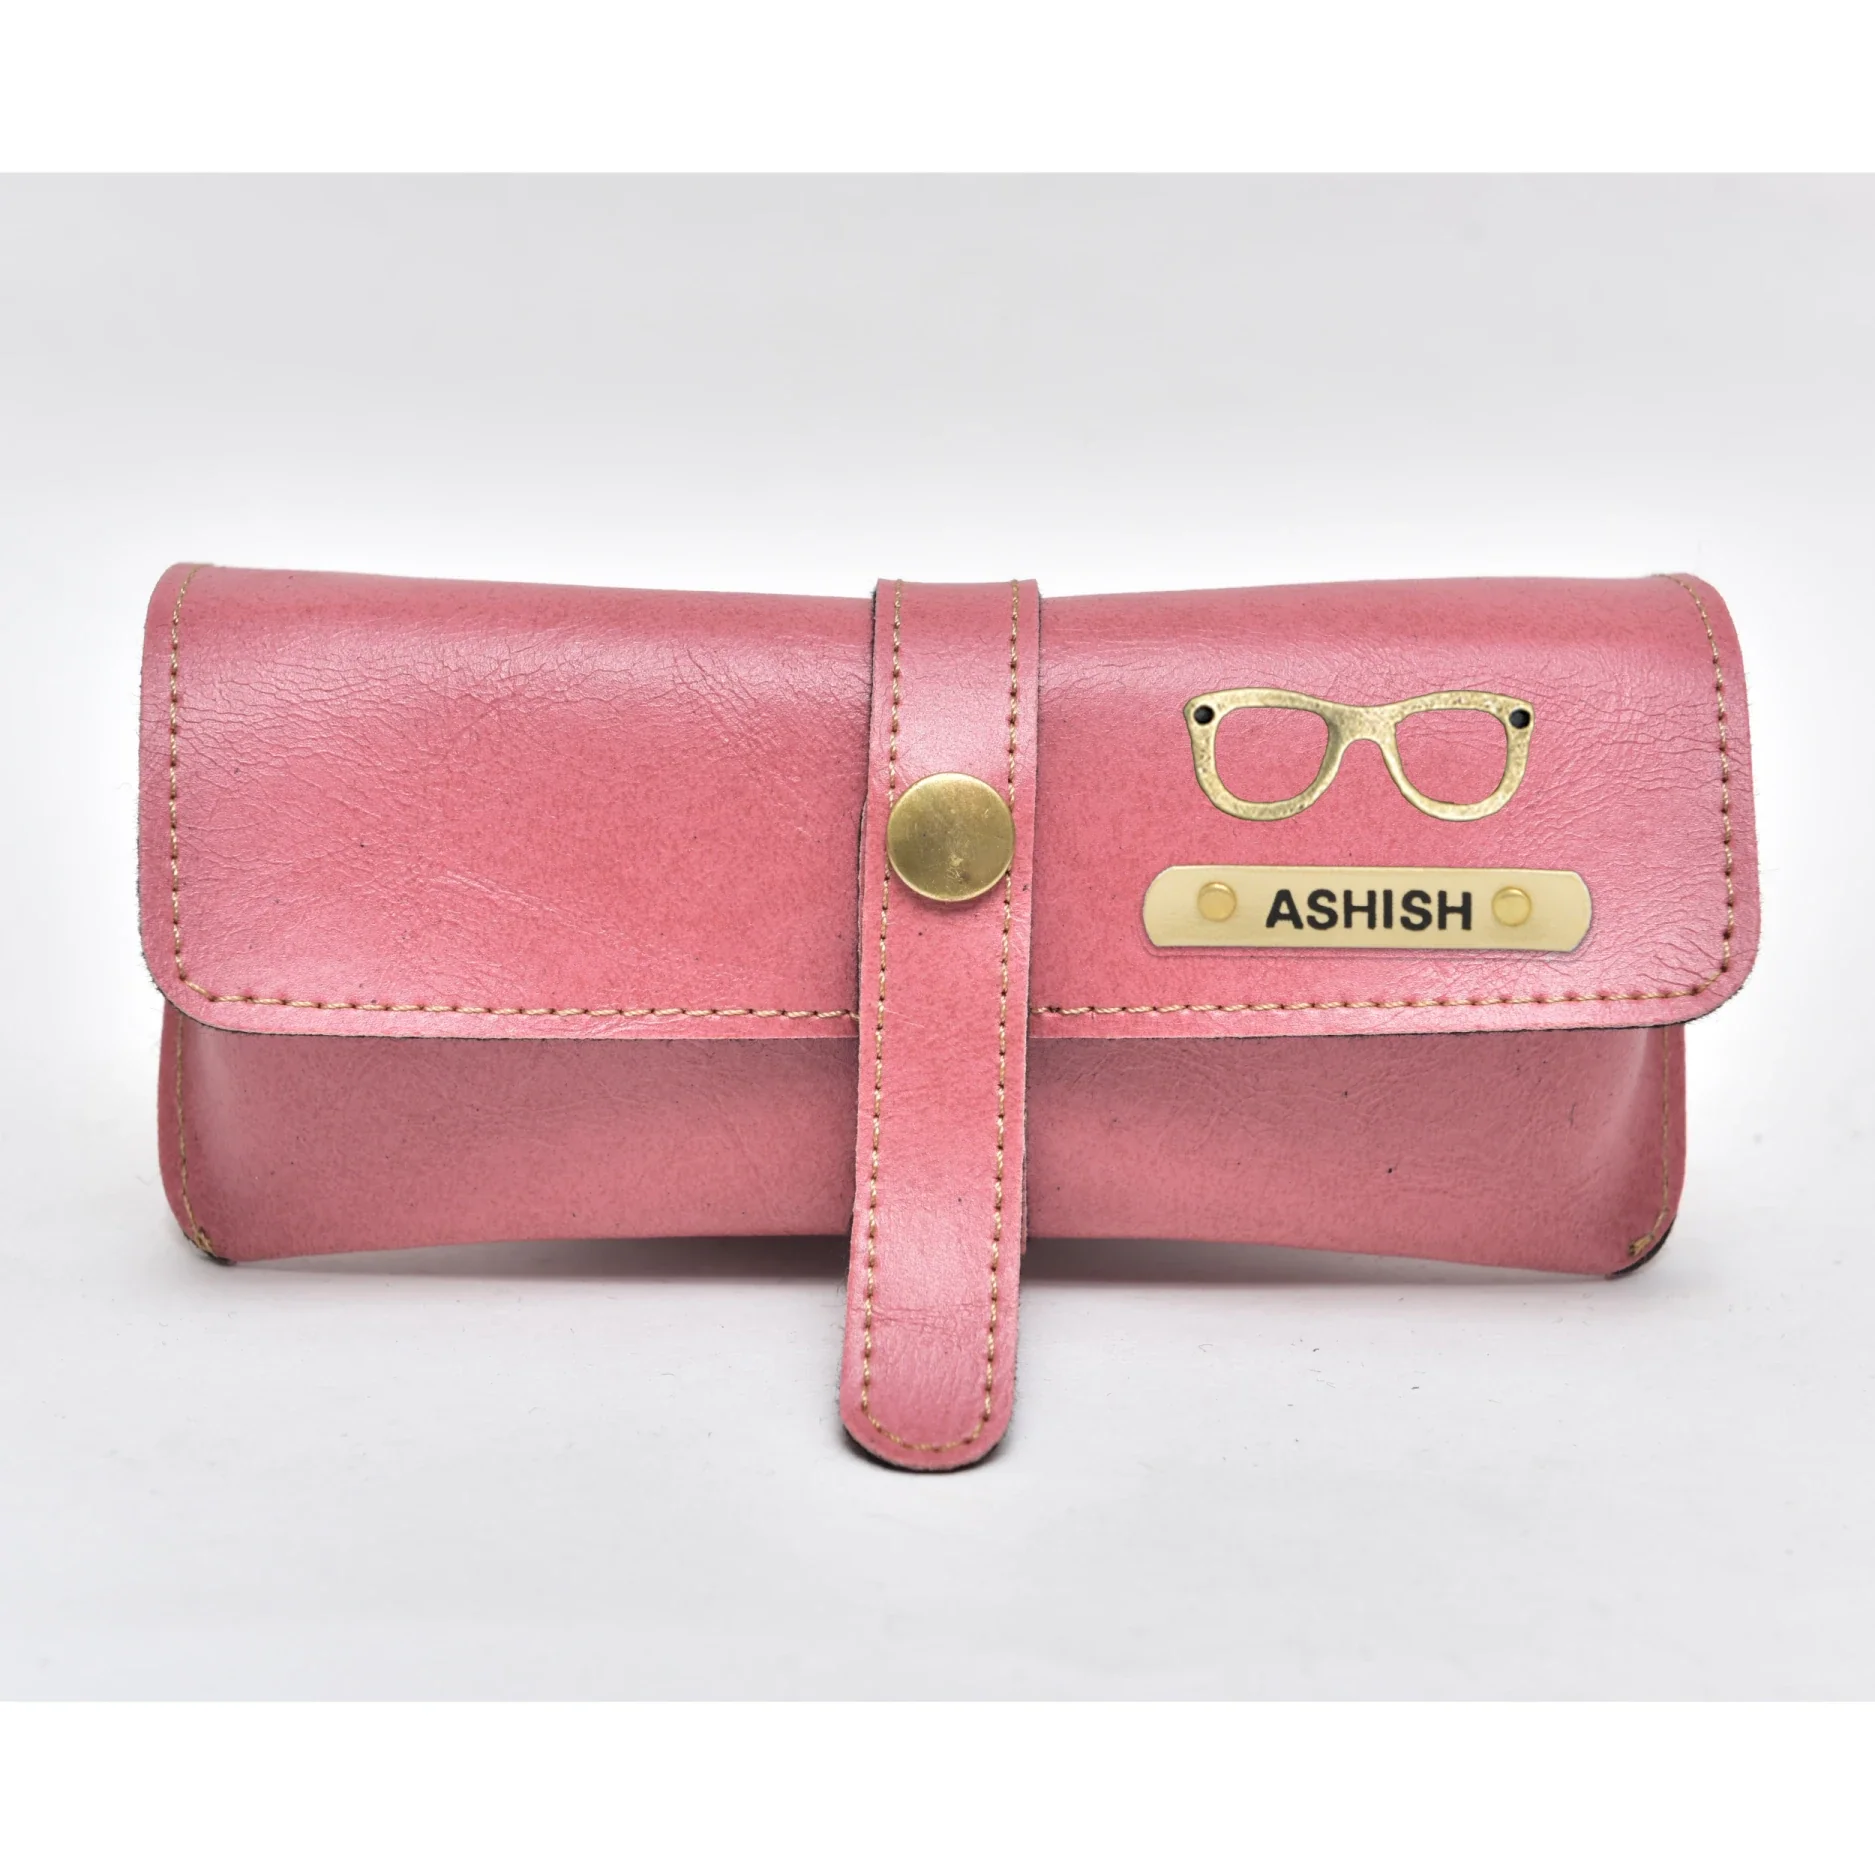 Our eyewear case is made with high-quality materials, ensuring durability and longevity for years to come.